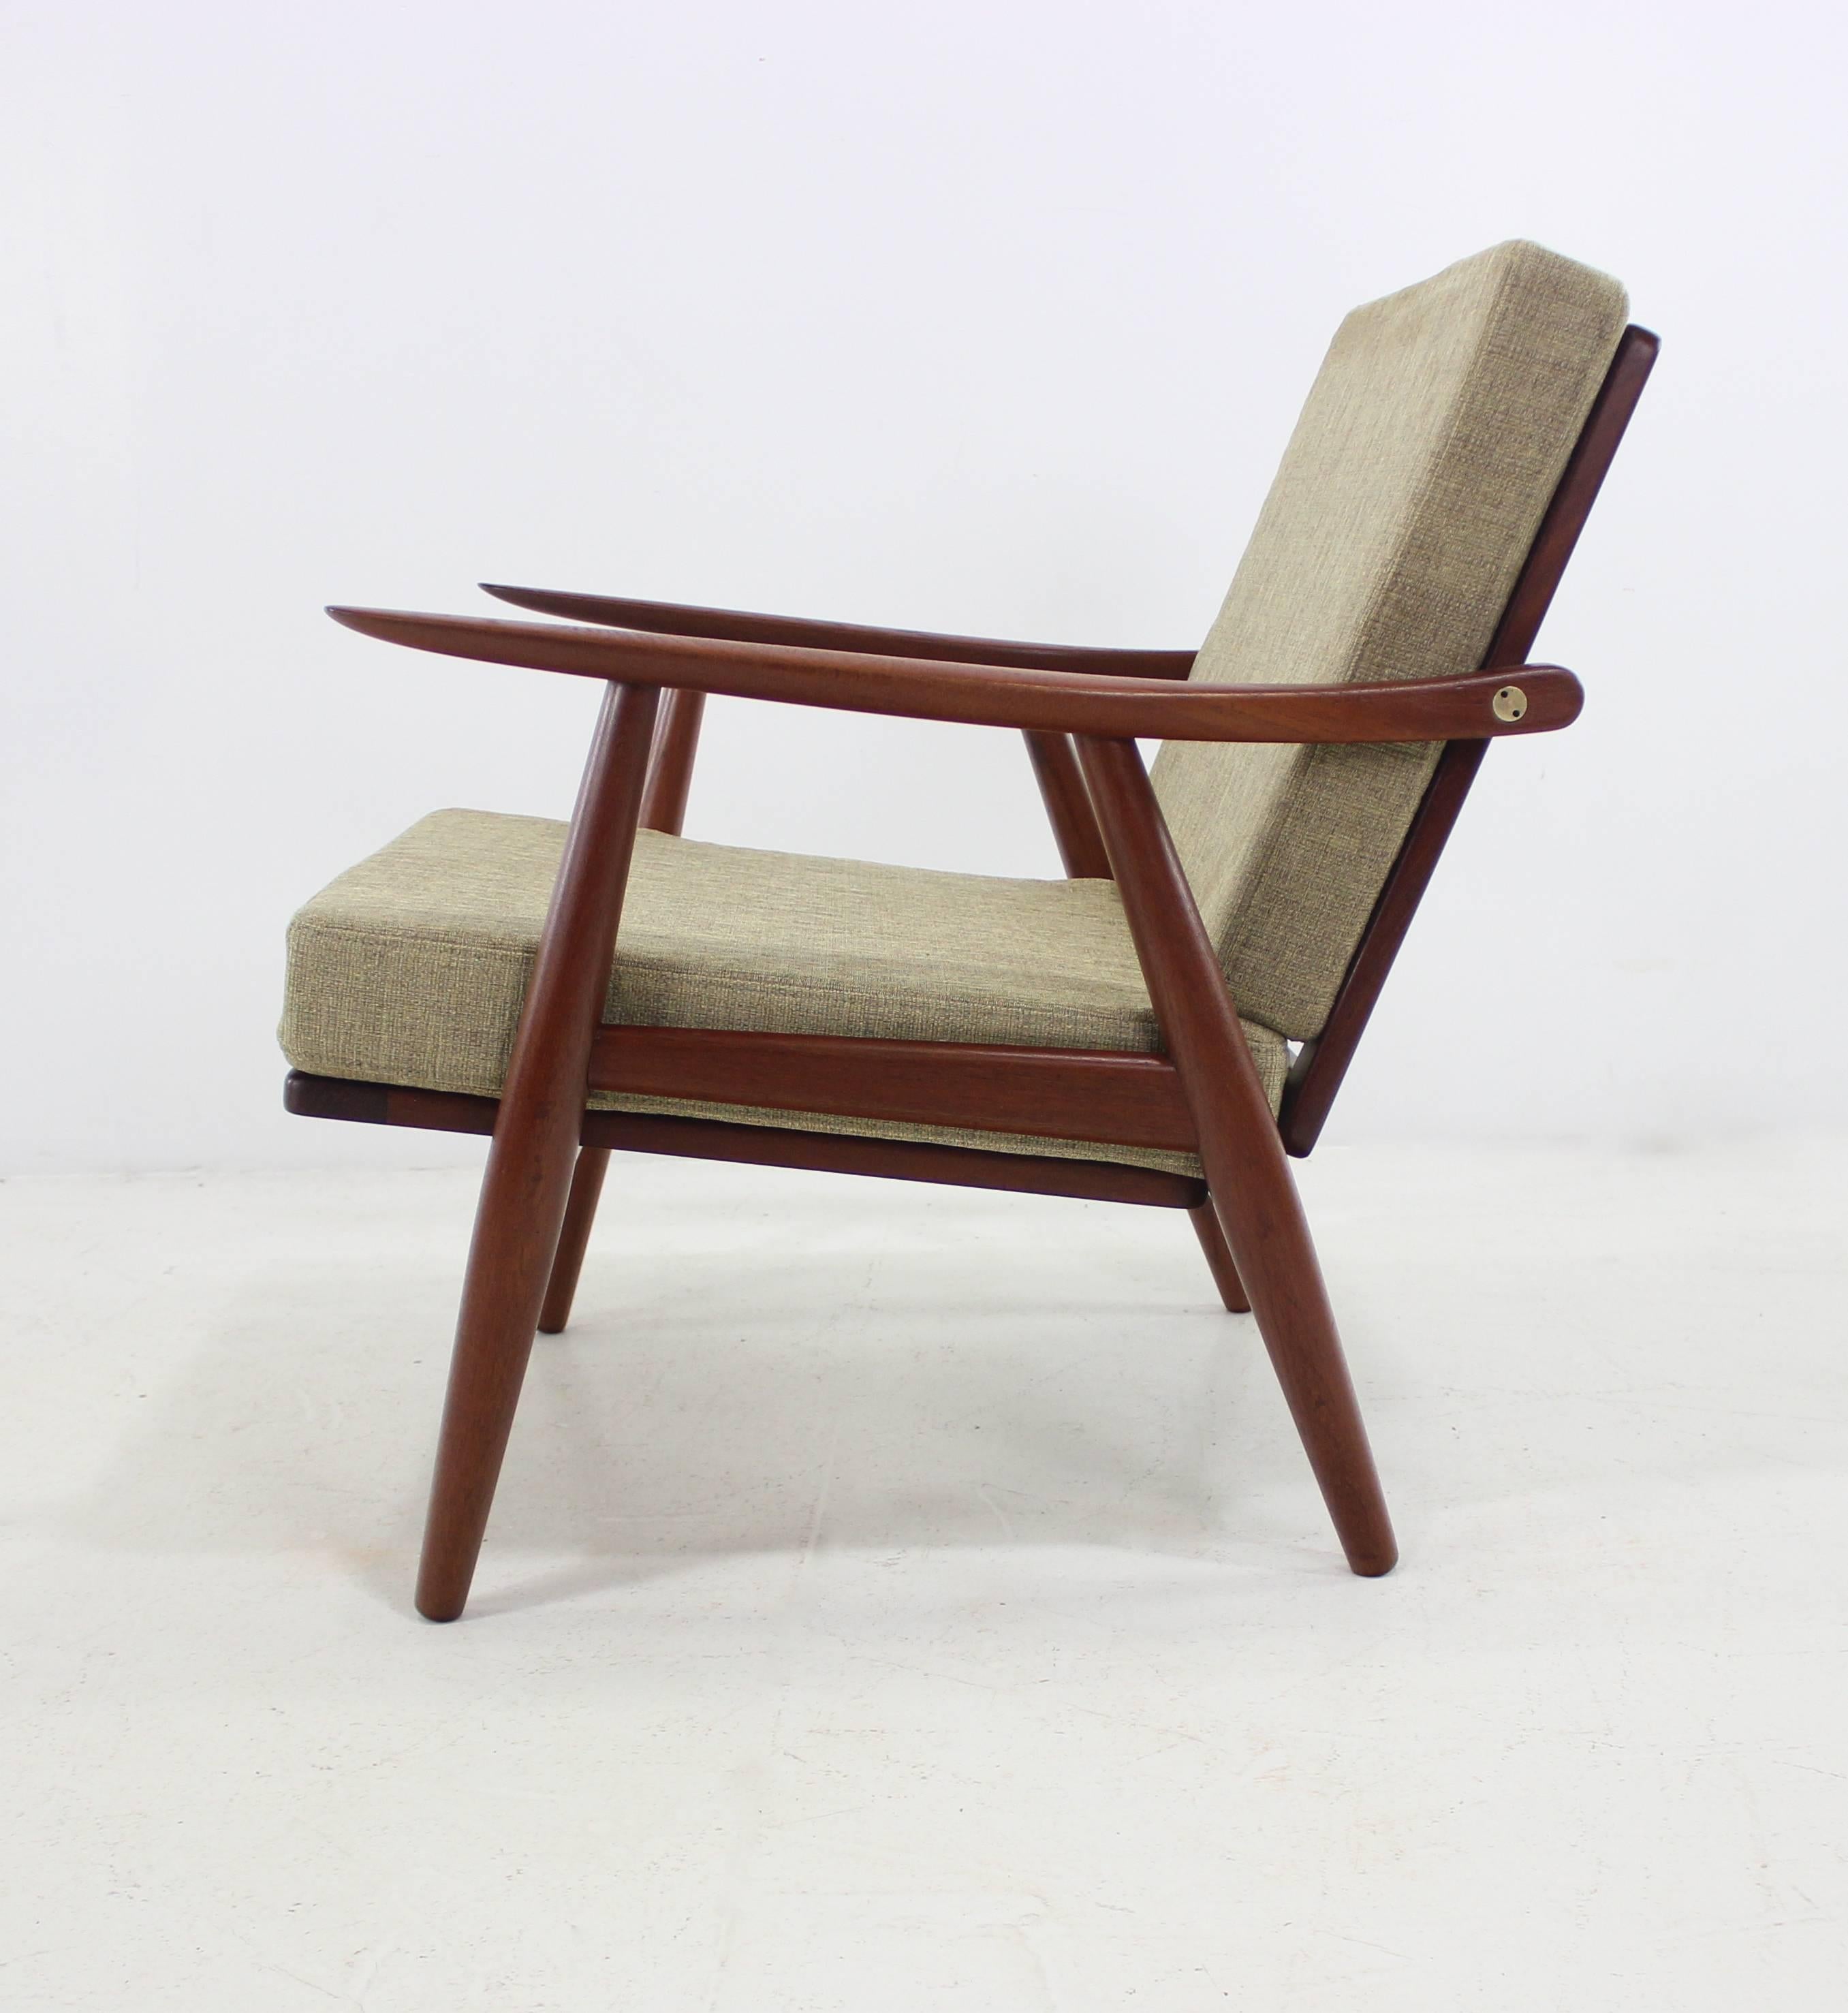 Rare Pair of Danish Modern Armchairs and Ottoman Designed by Hans Wegner In Excellent Condition For Sale In Portland, OR